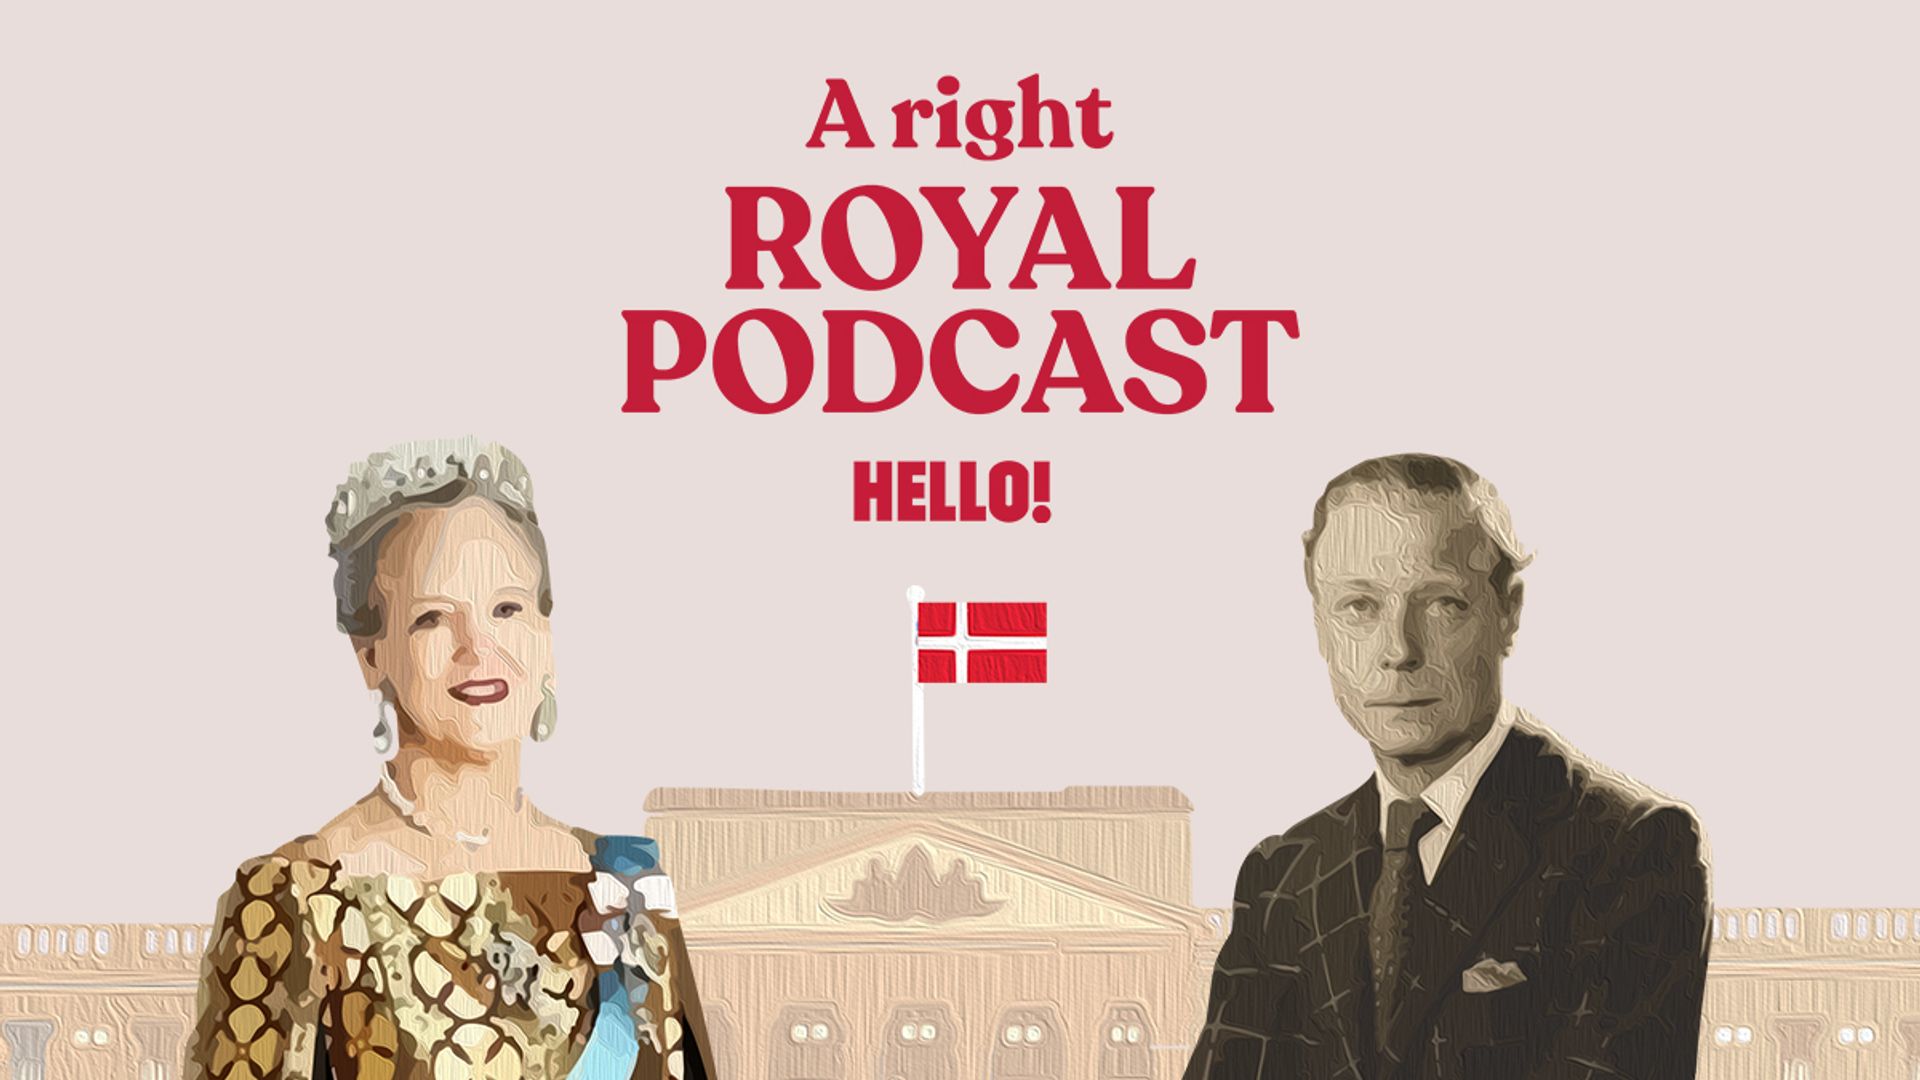 A Right Royal Podcast Abdication episode